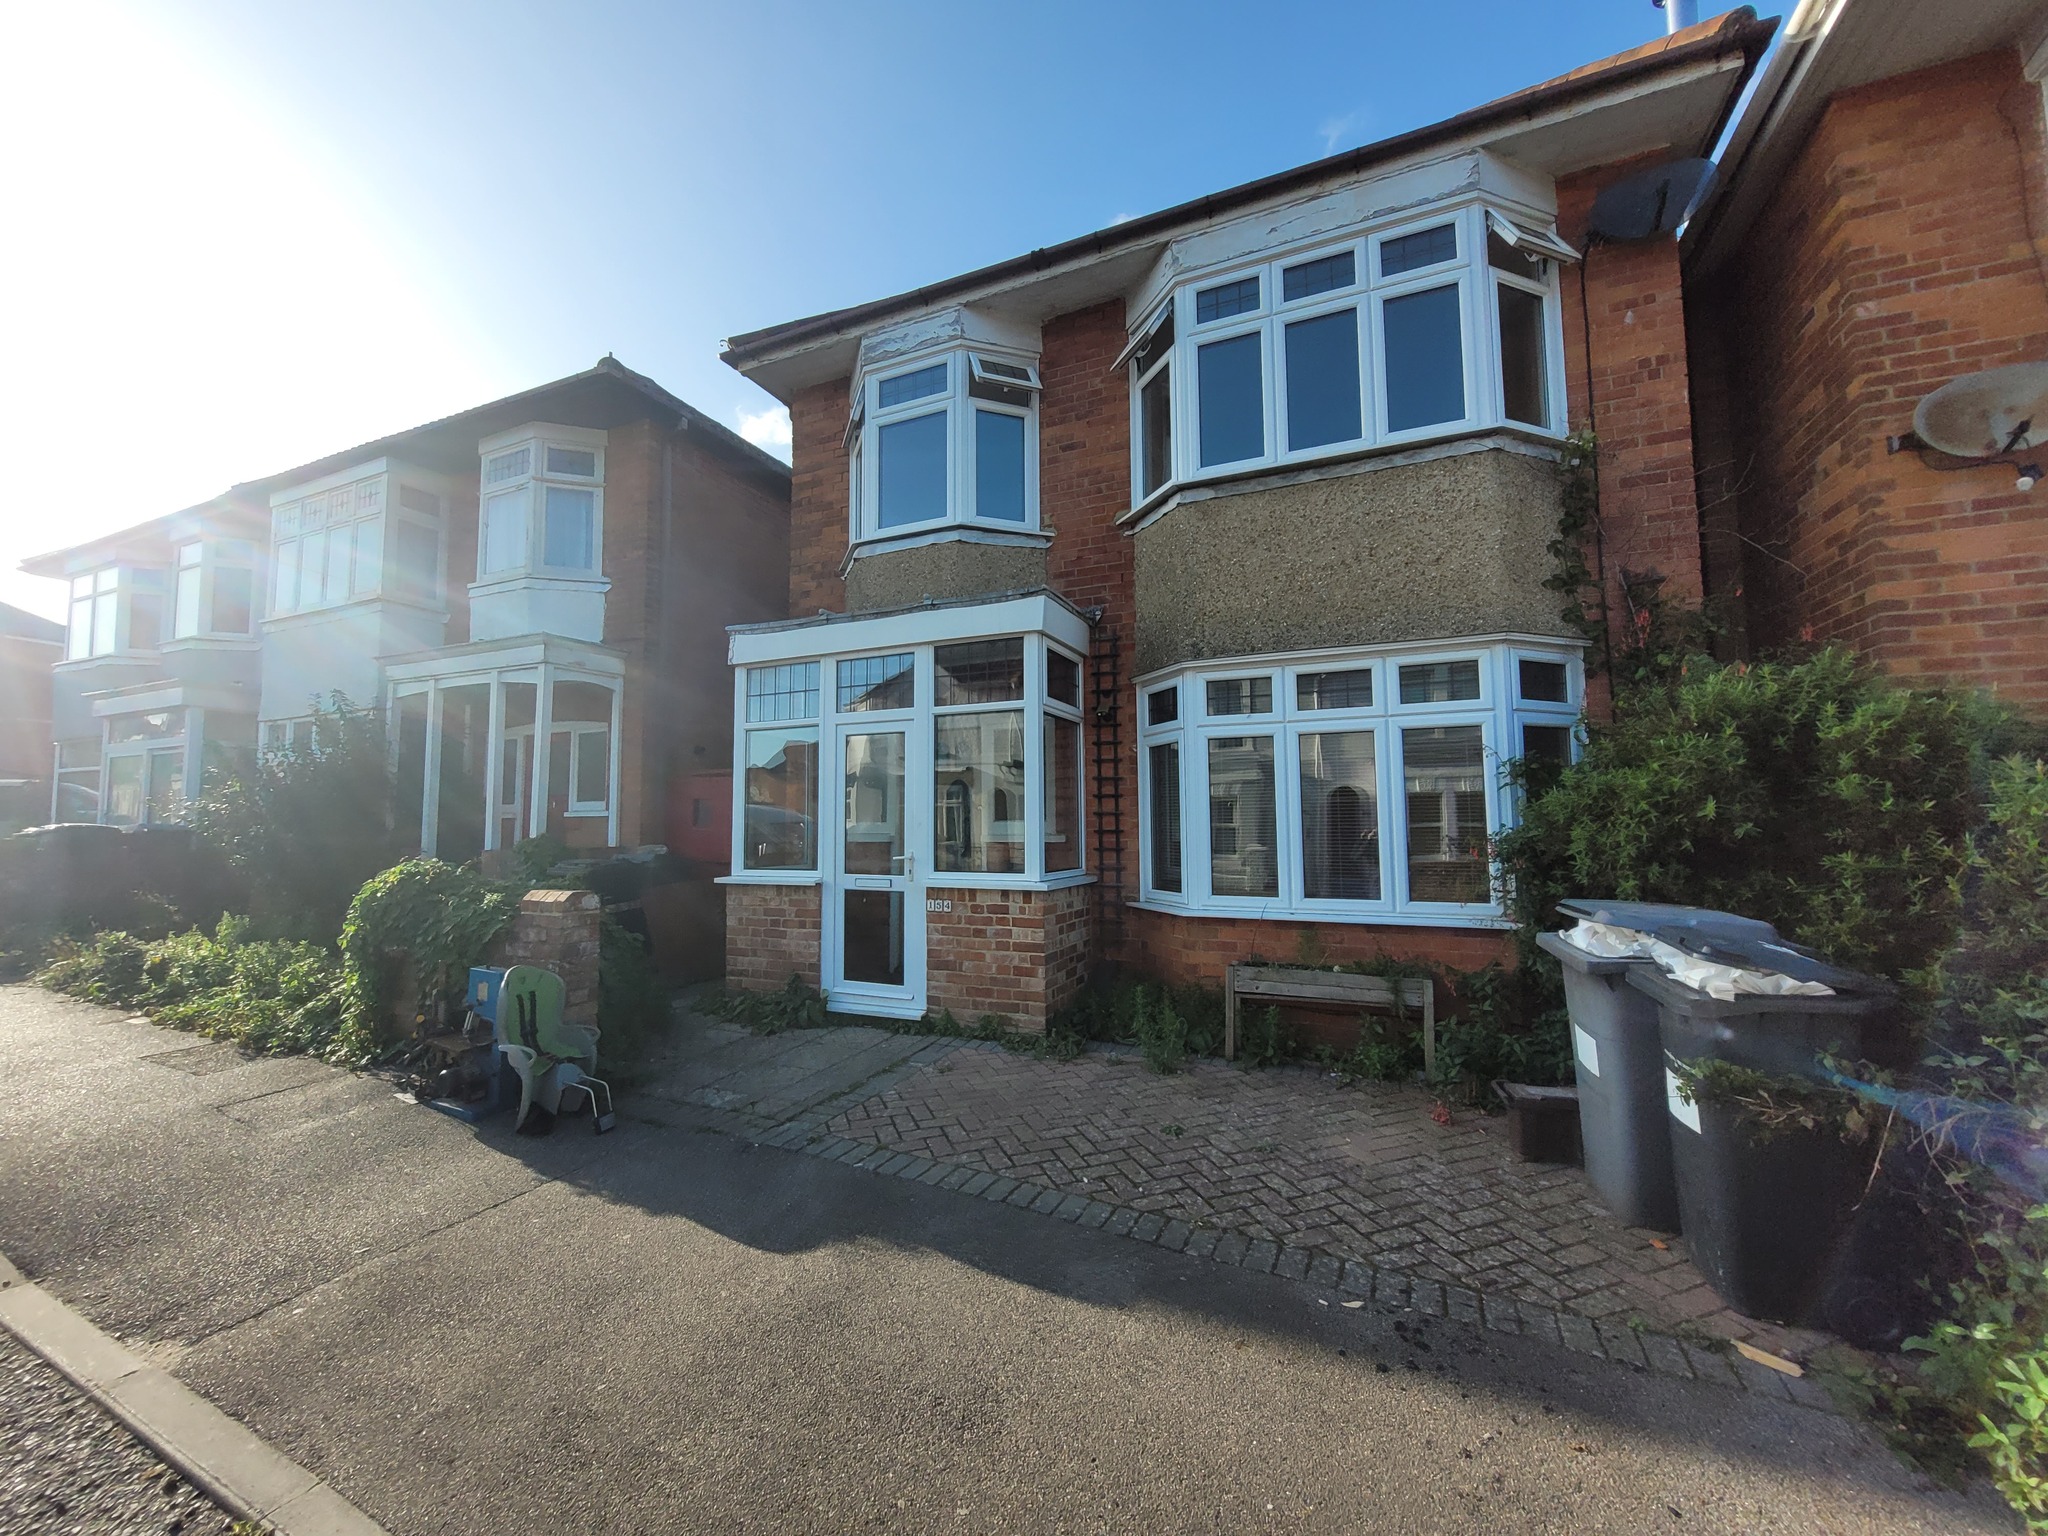 3 bed detached house to rent in Parkwood Road, Bournemouth - Property Image 1